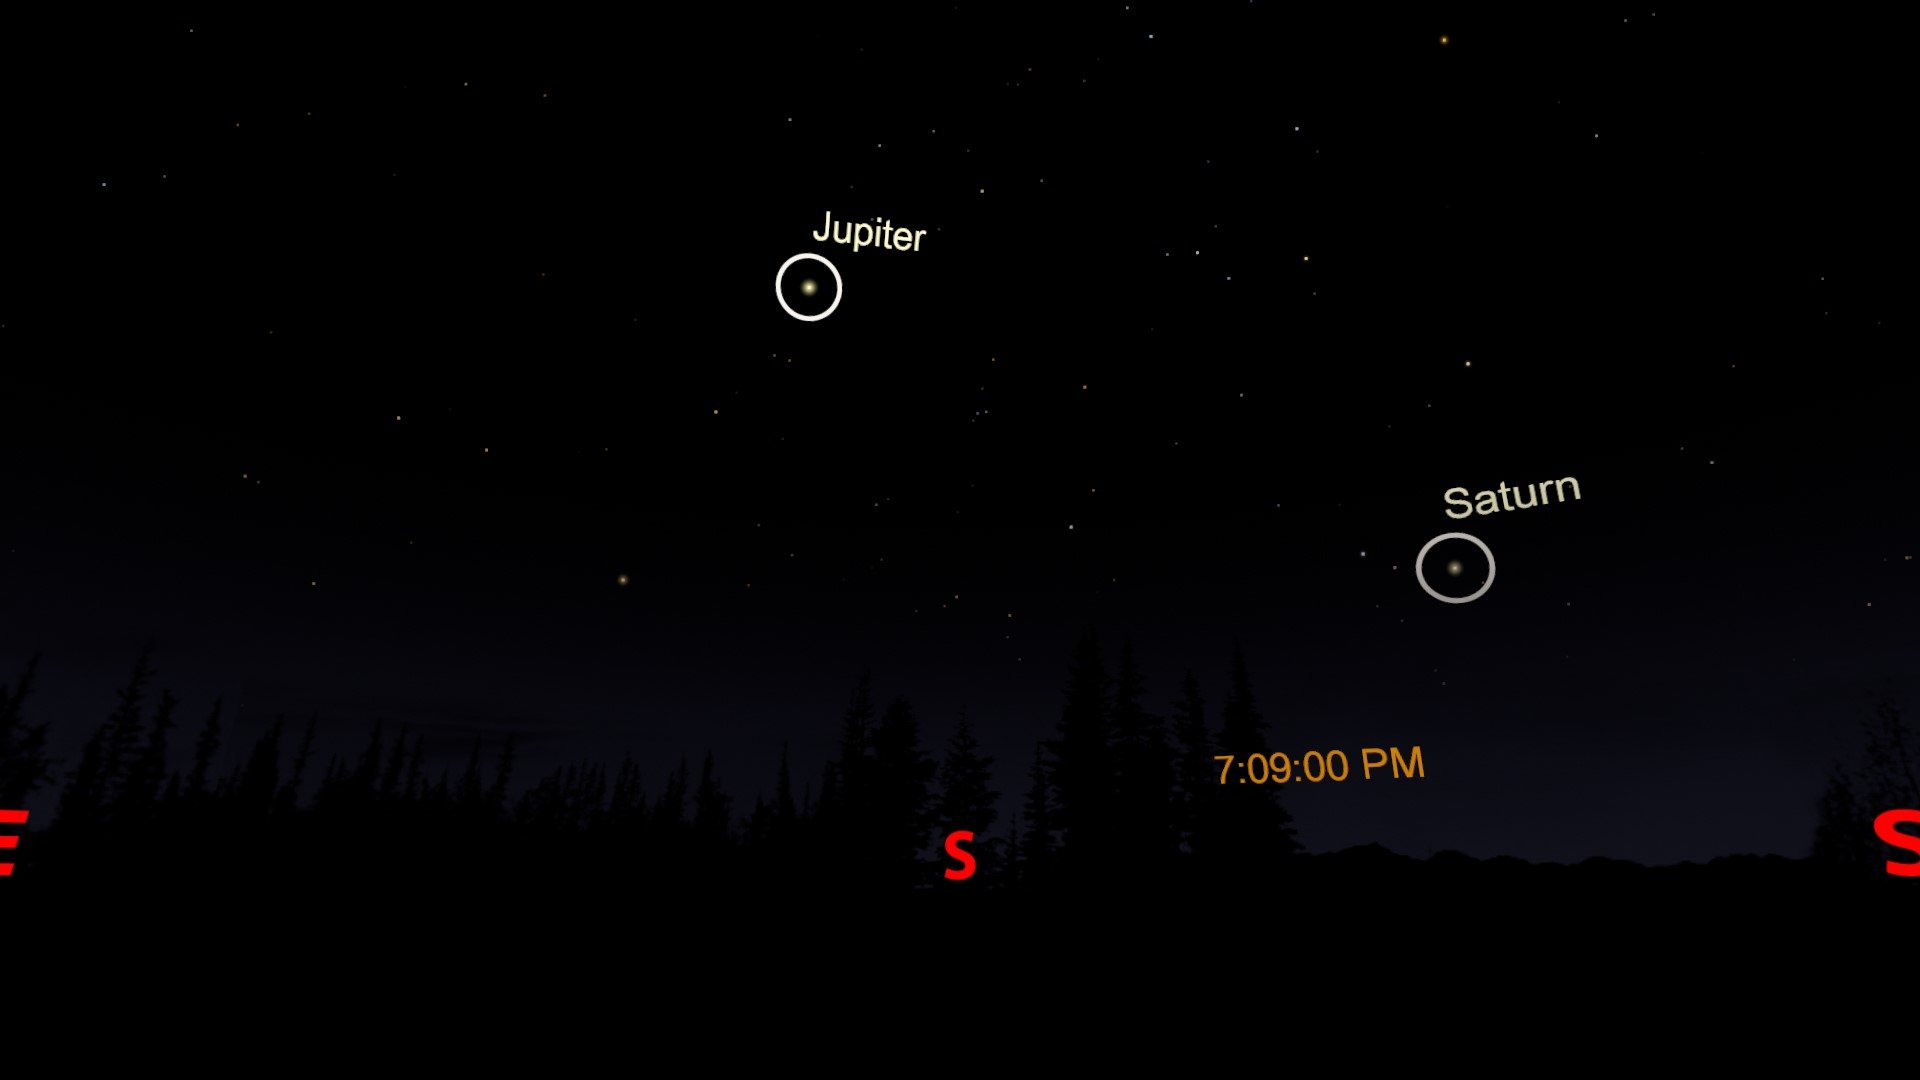 A view of the southern sky around 7 pm. Jupiter and Saturn are marked with circles and labels. Jupiter is in the center of the image, while Saturn is in the lower right corner.